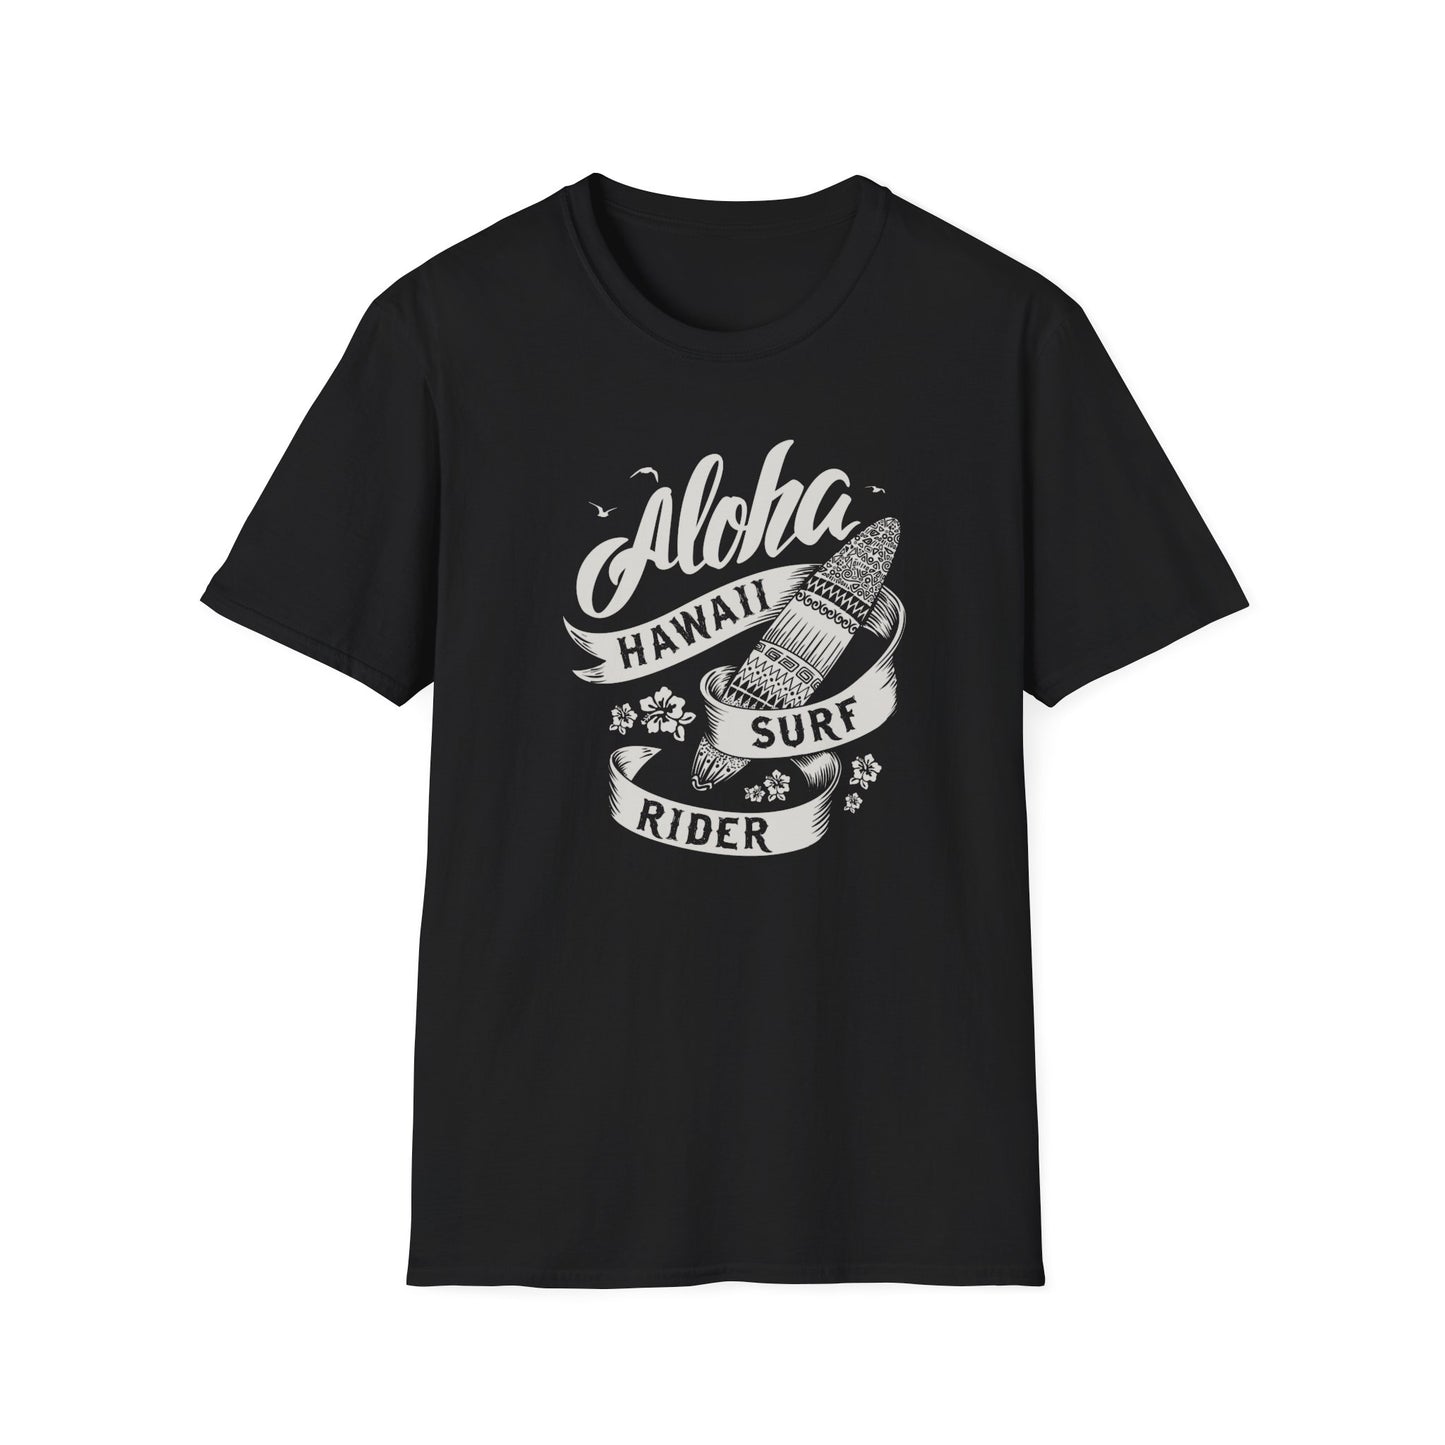 Aloha Hawaii Surf Rider T-Shirt: Ride the Waves in Style